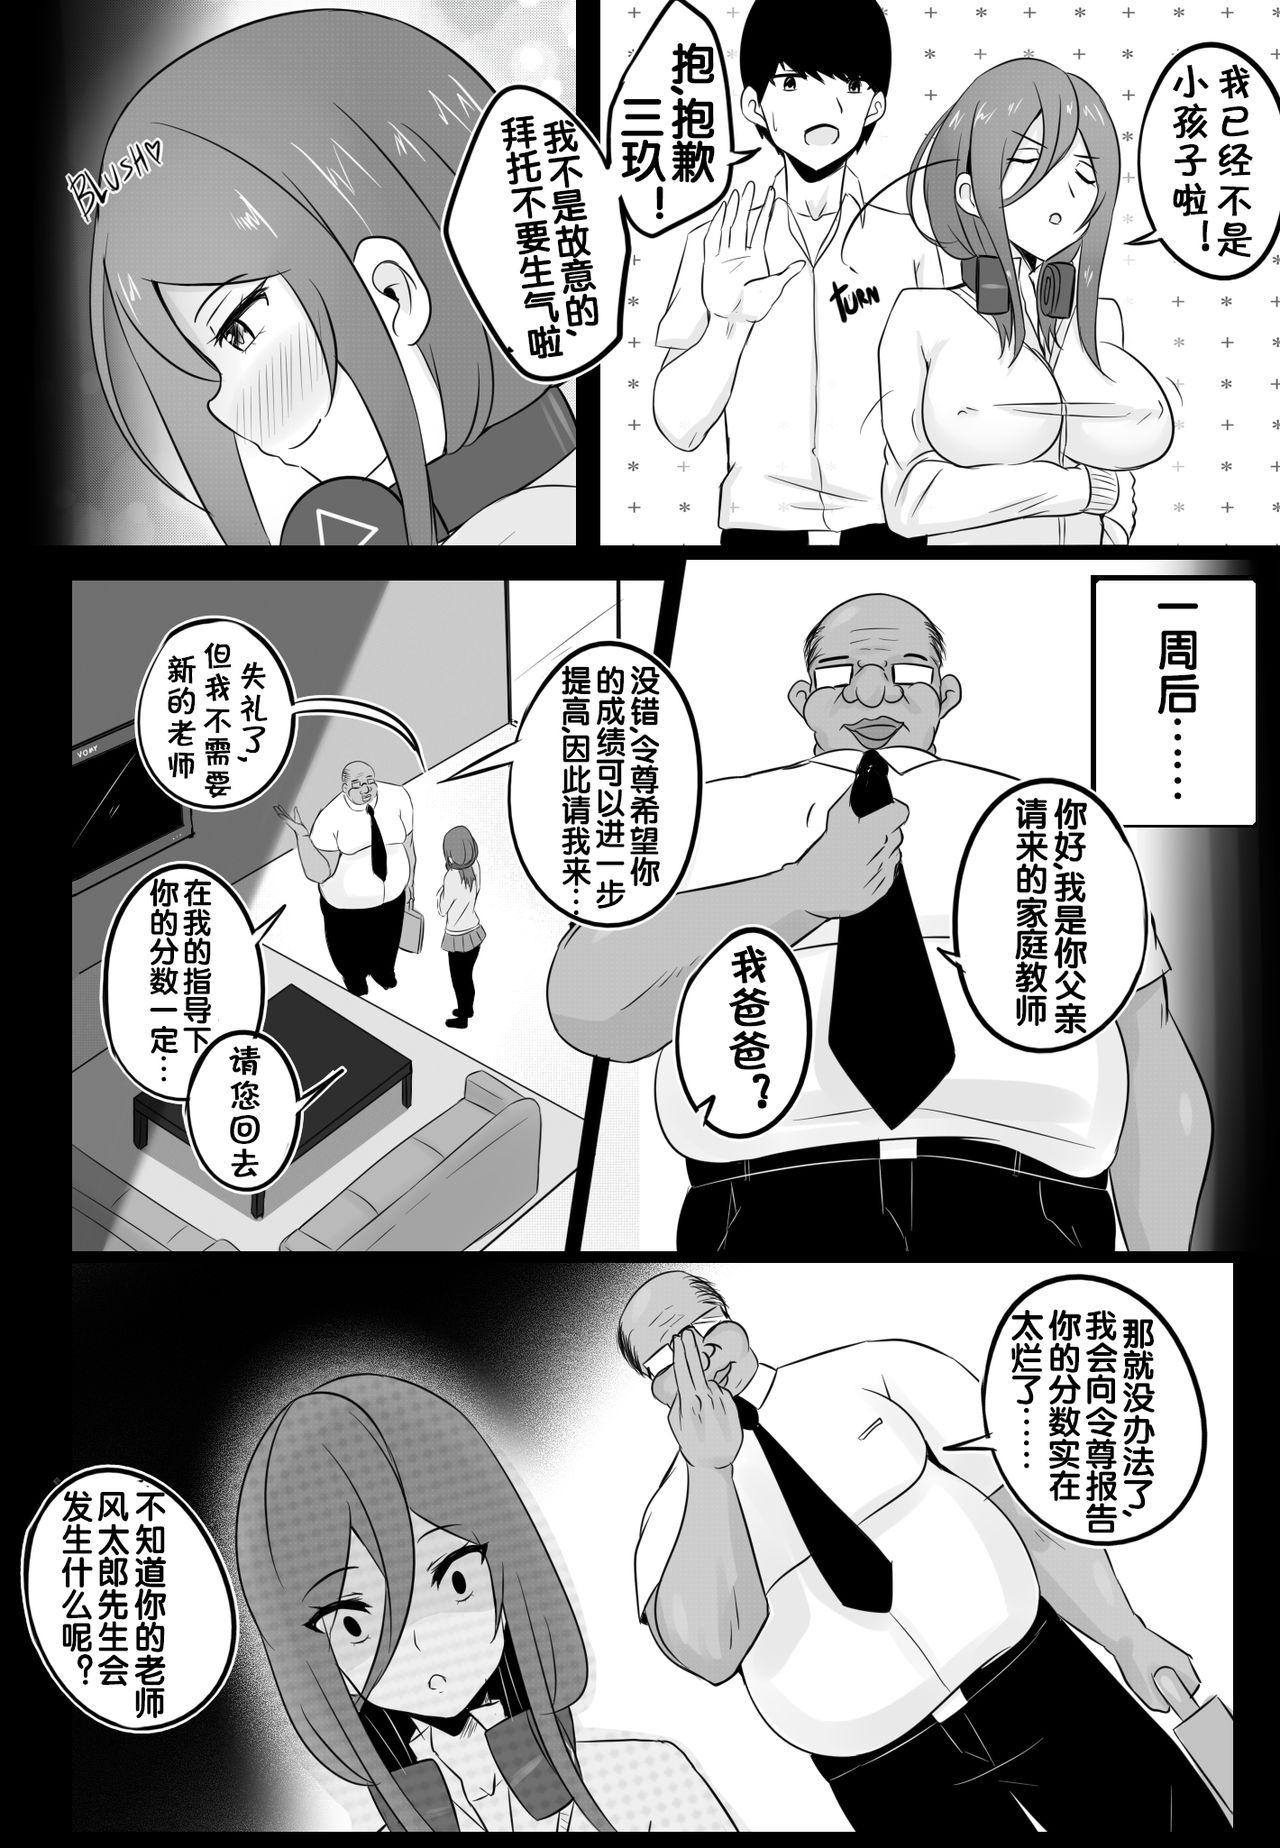 Ginger B-Trayal18 - Gotoubun no hanayome | the quintessential quintuplets Publico - Page 5